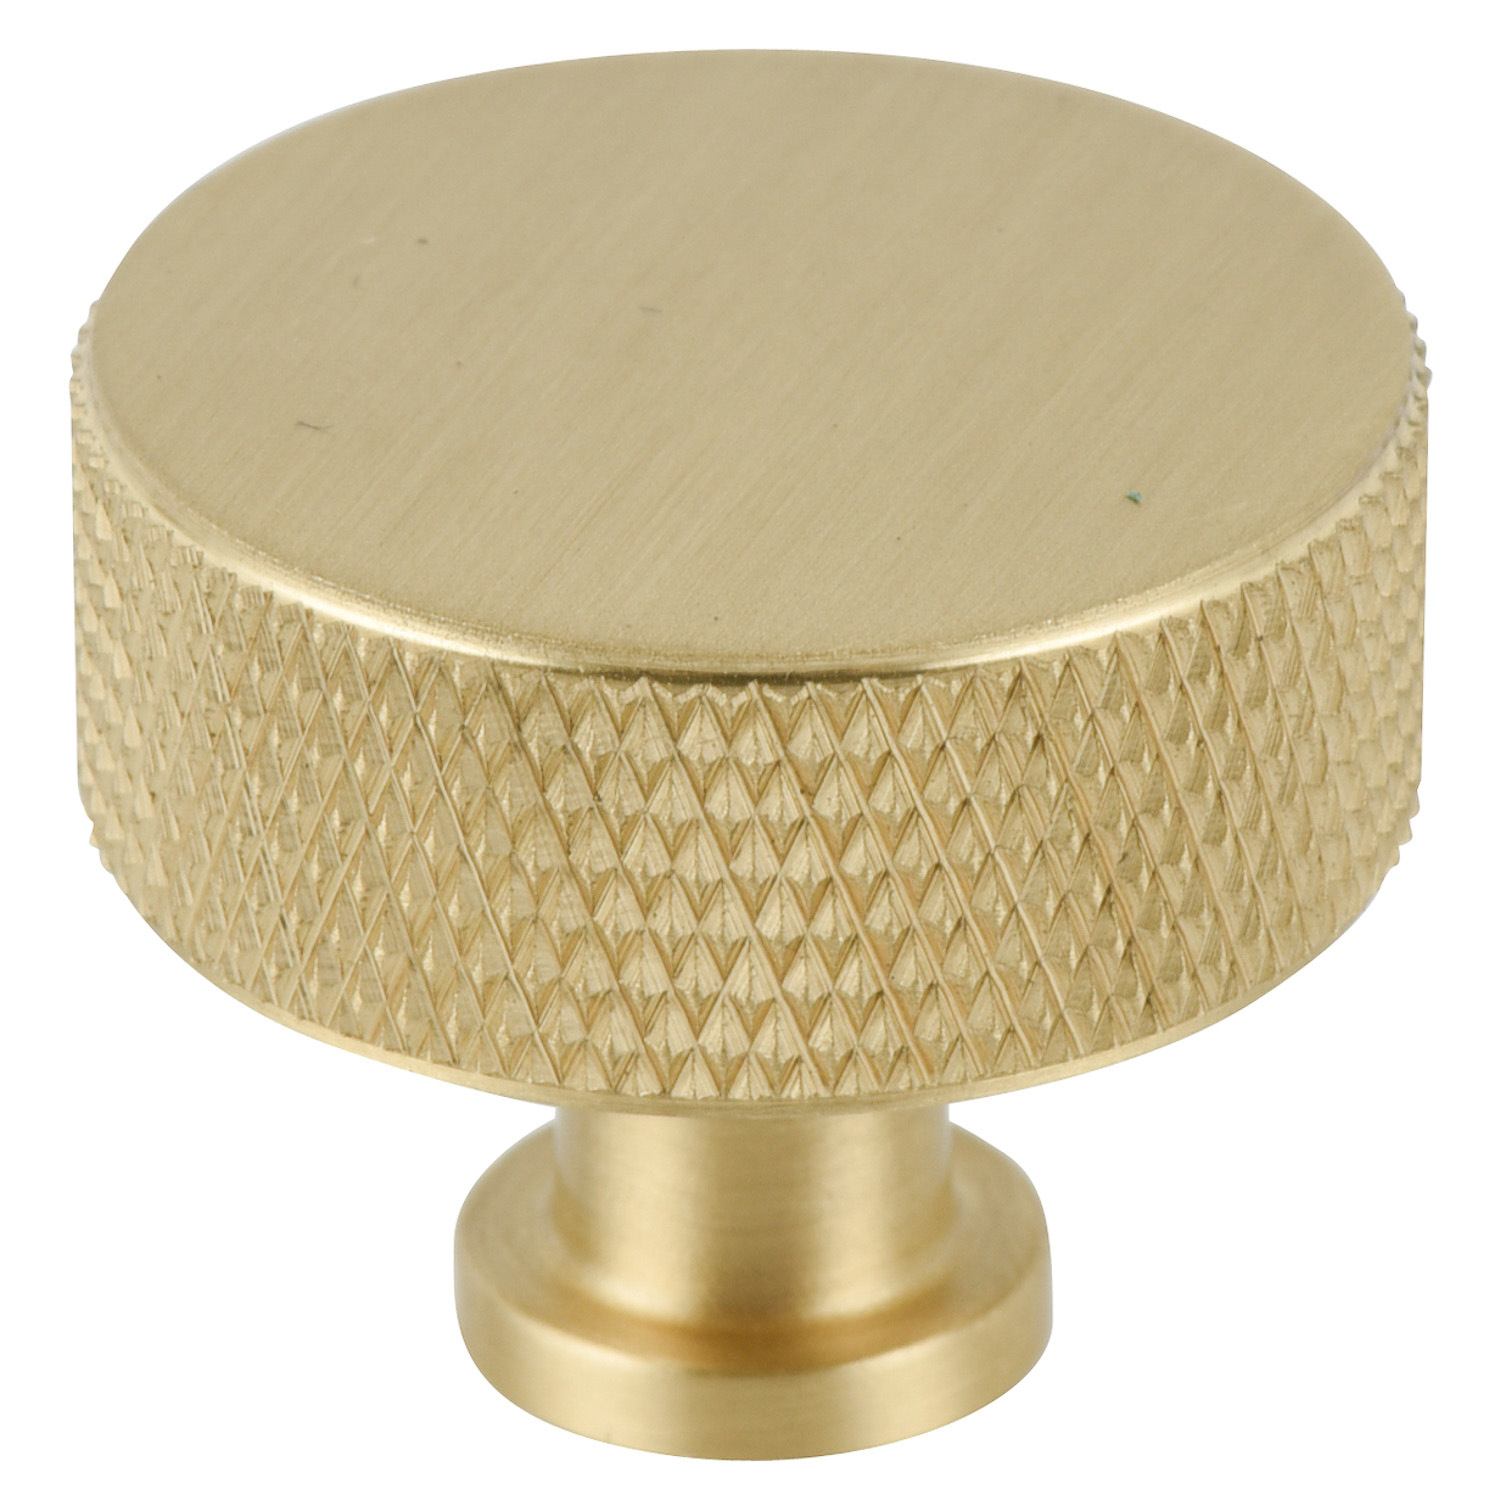 Wholesale Furniture Handle Good Quality Brass Furniture Handle